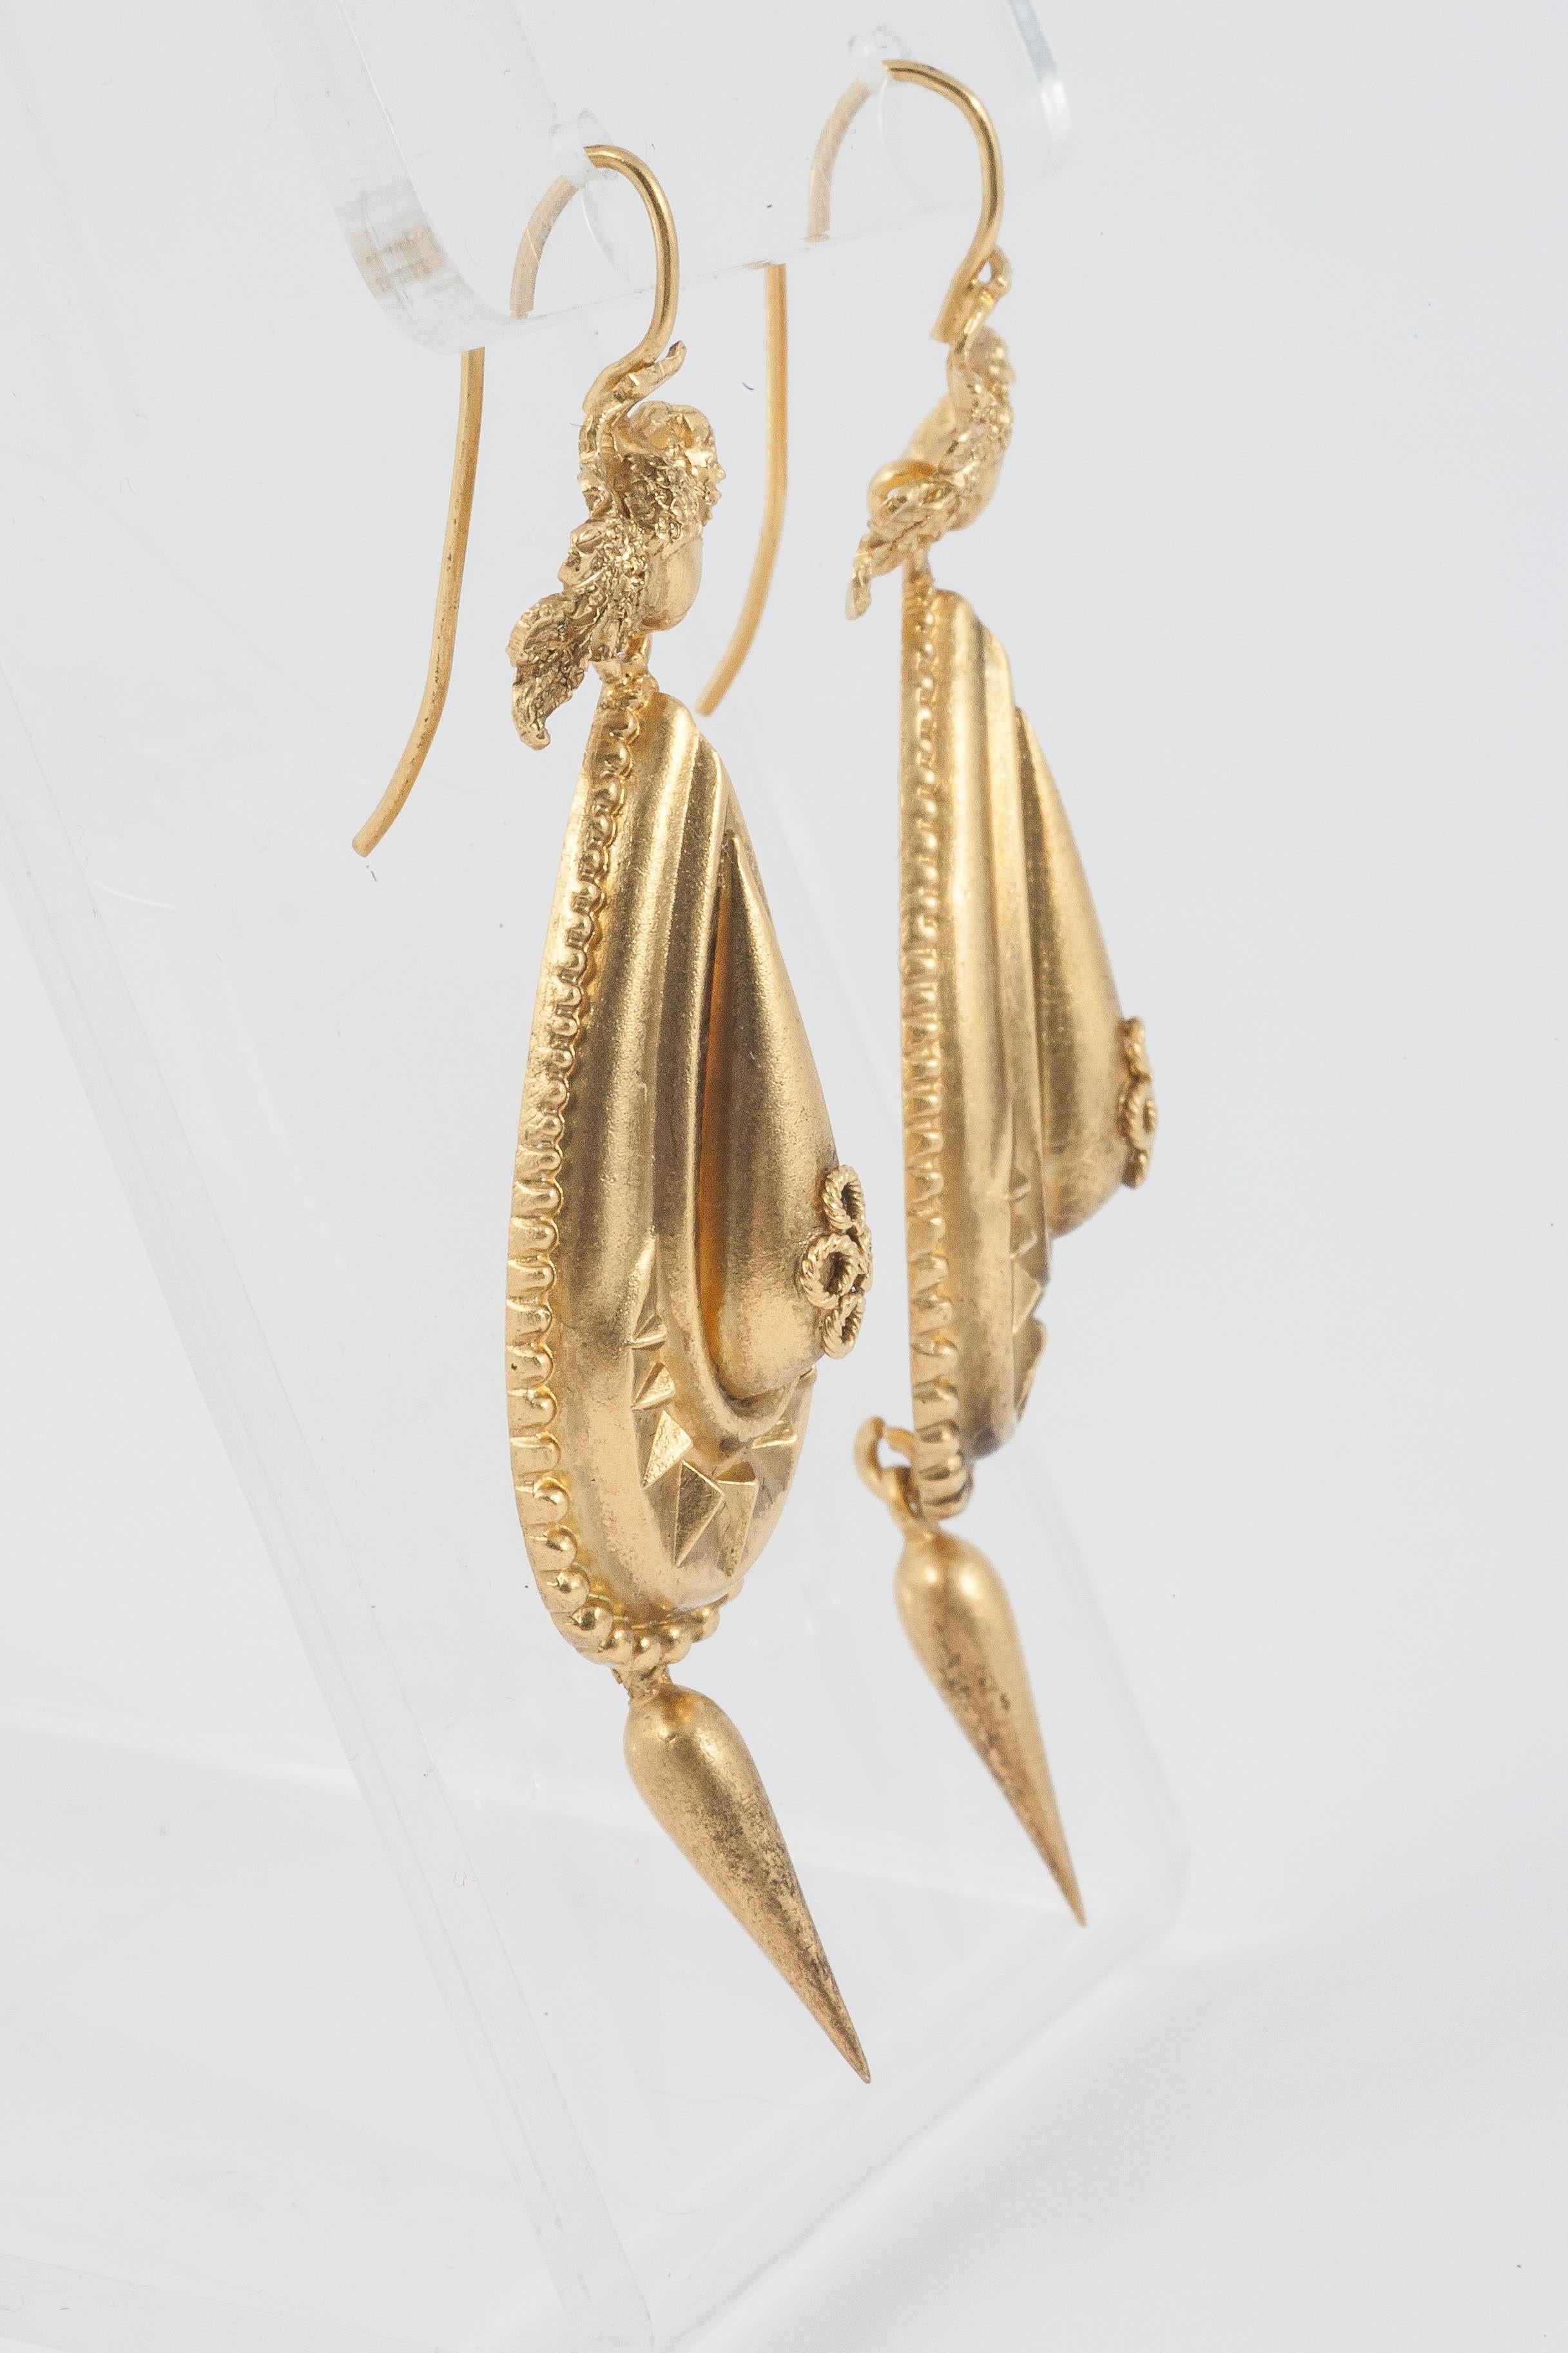 Victorian Etruscan Revival Gold Earrings In Excellent Condition For Sale In London, GB